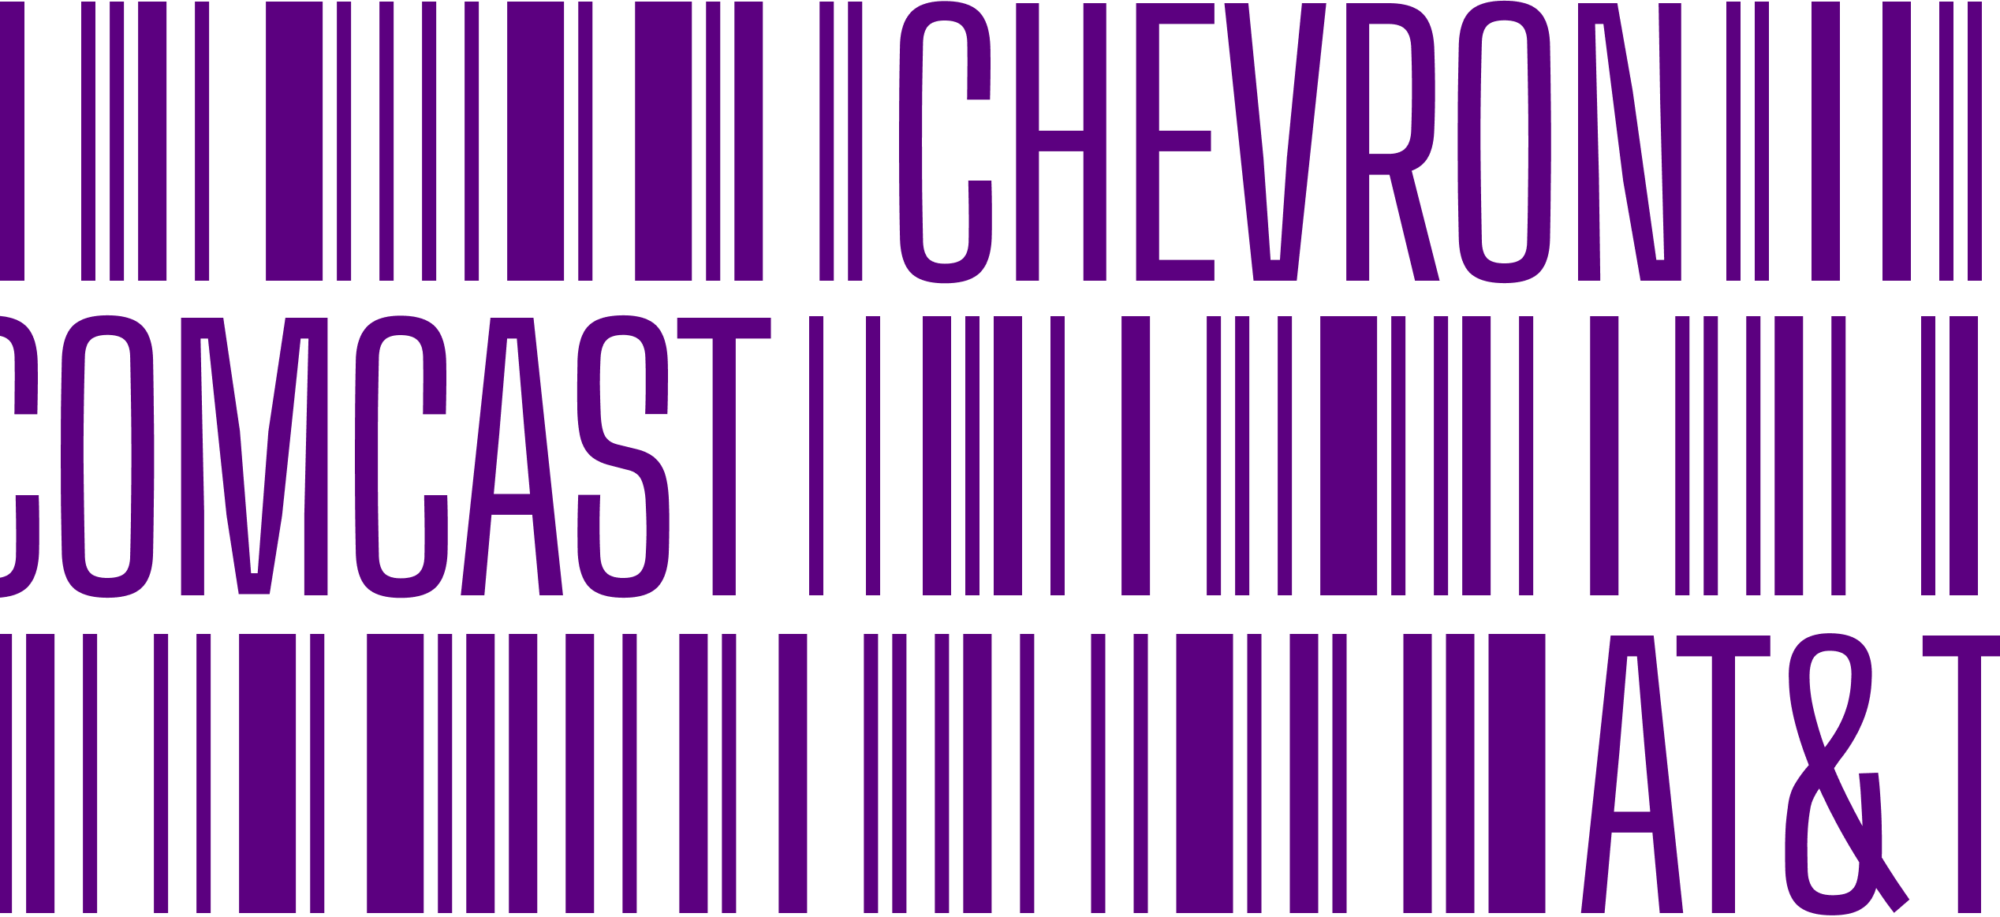 Composite of corporate names mixed with barcodes